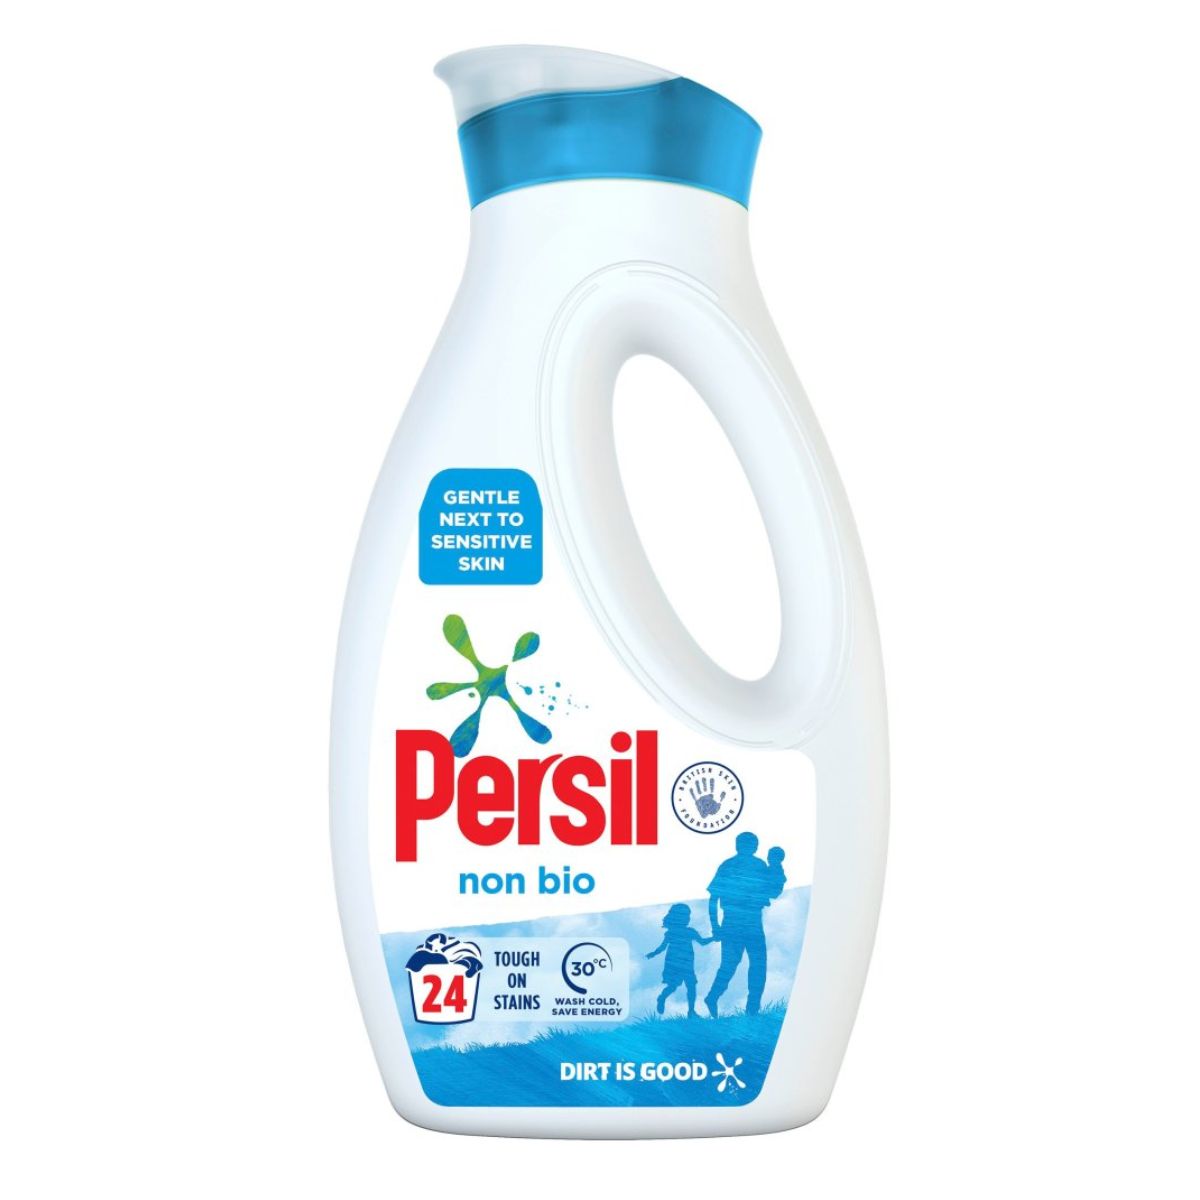 A bottle of Persil - Non Bio Liquid Detergent - 648ml on a white background.